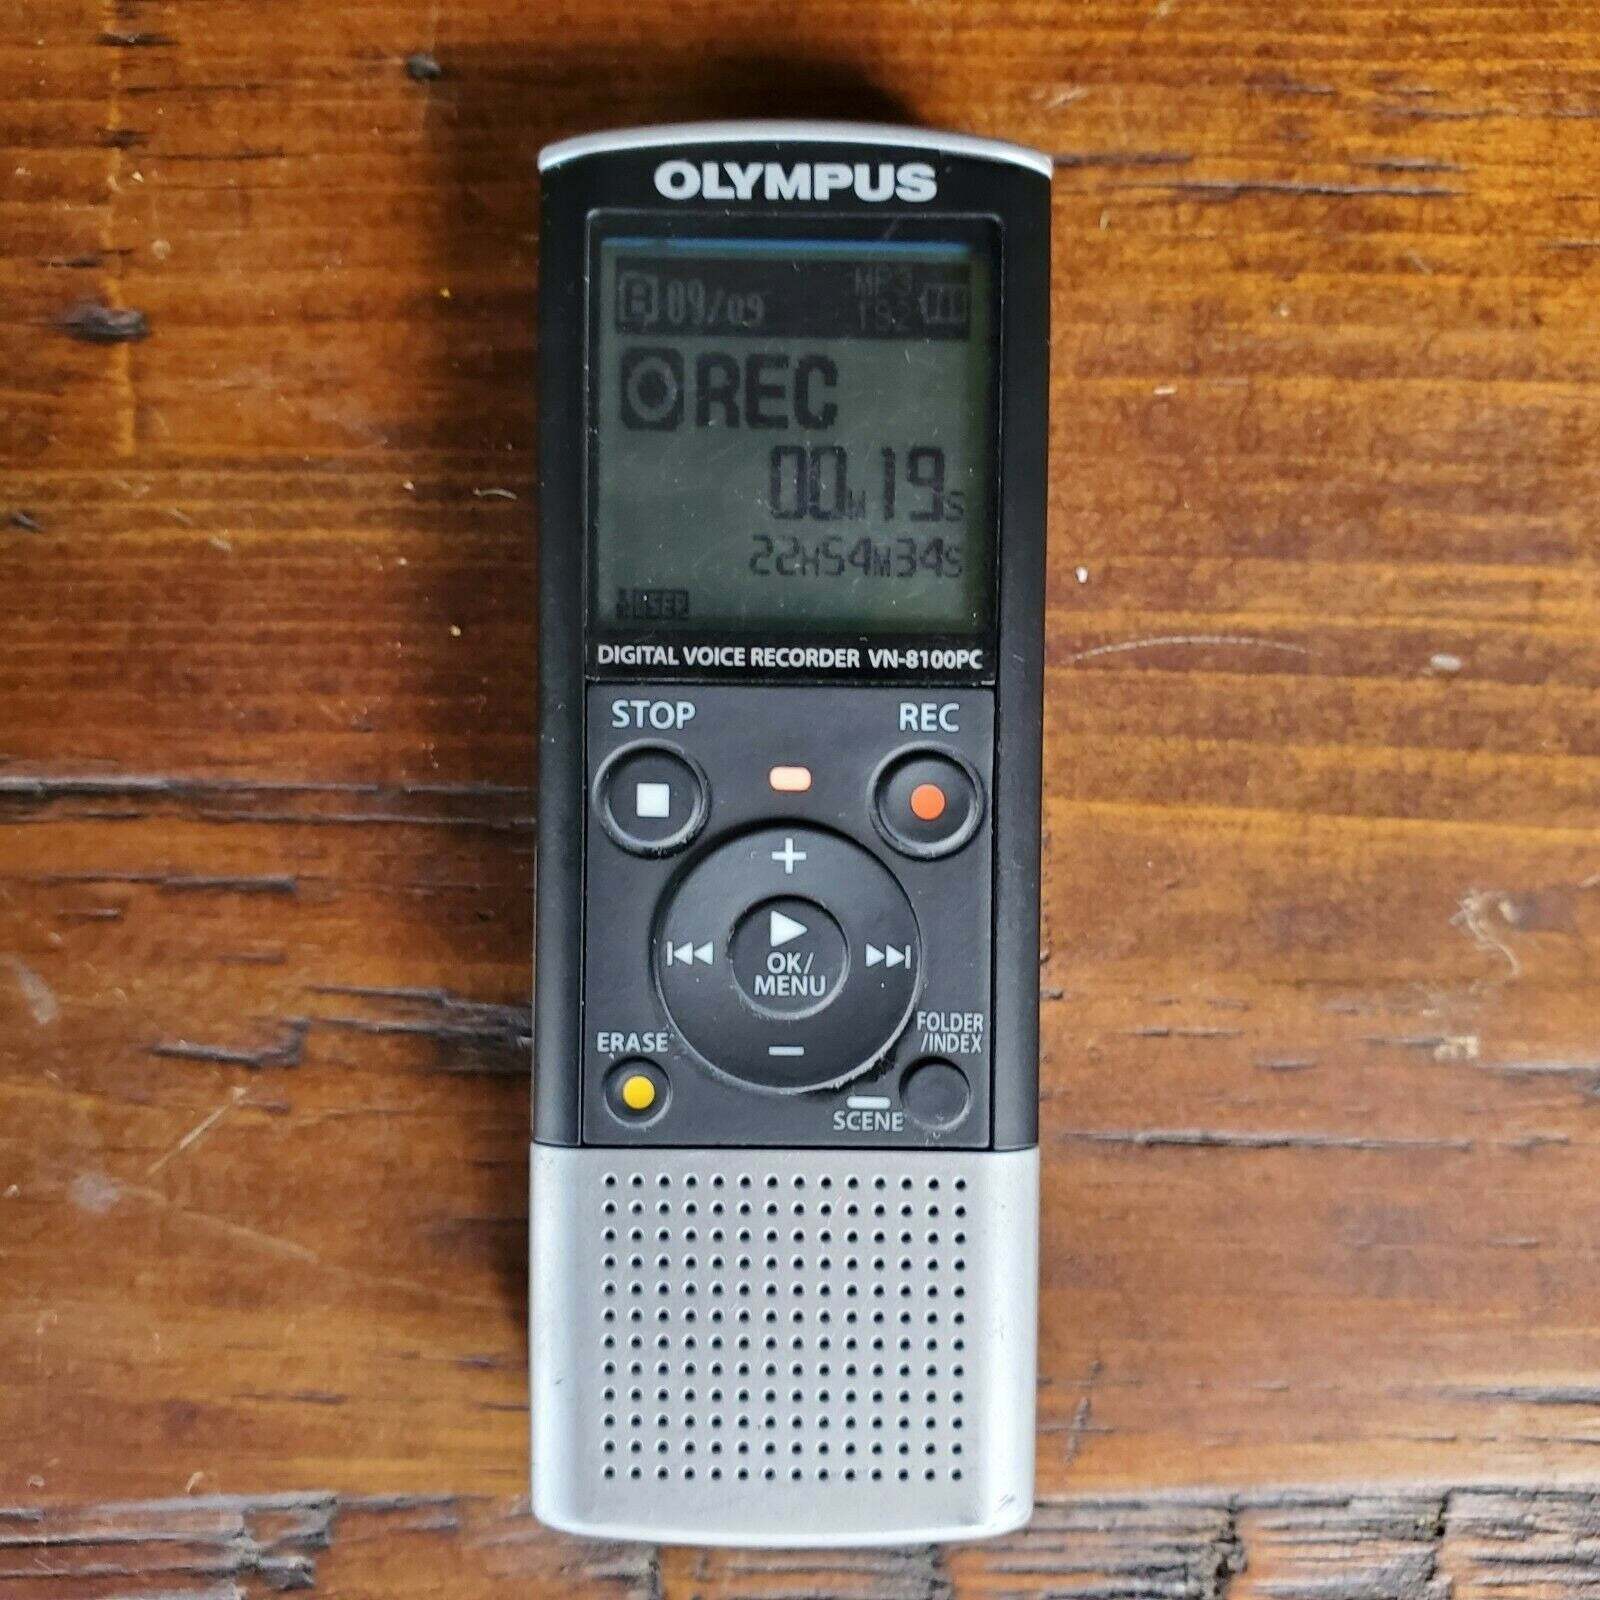 Primary image for Olympus VN-8100PC Handheld Digital Voice Recorder